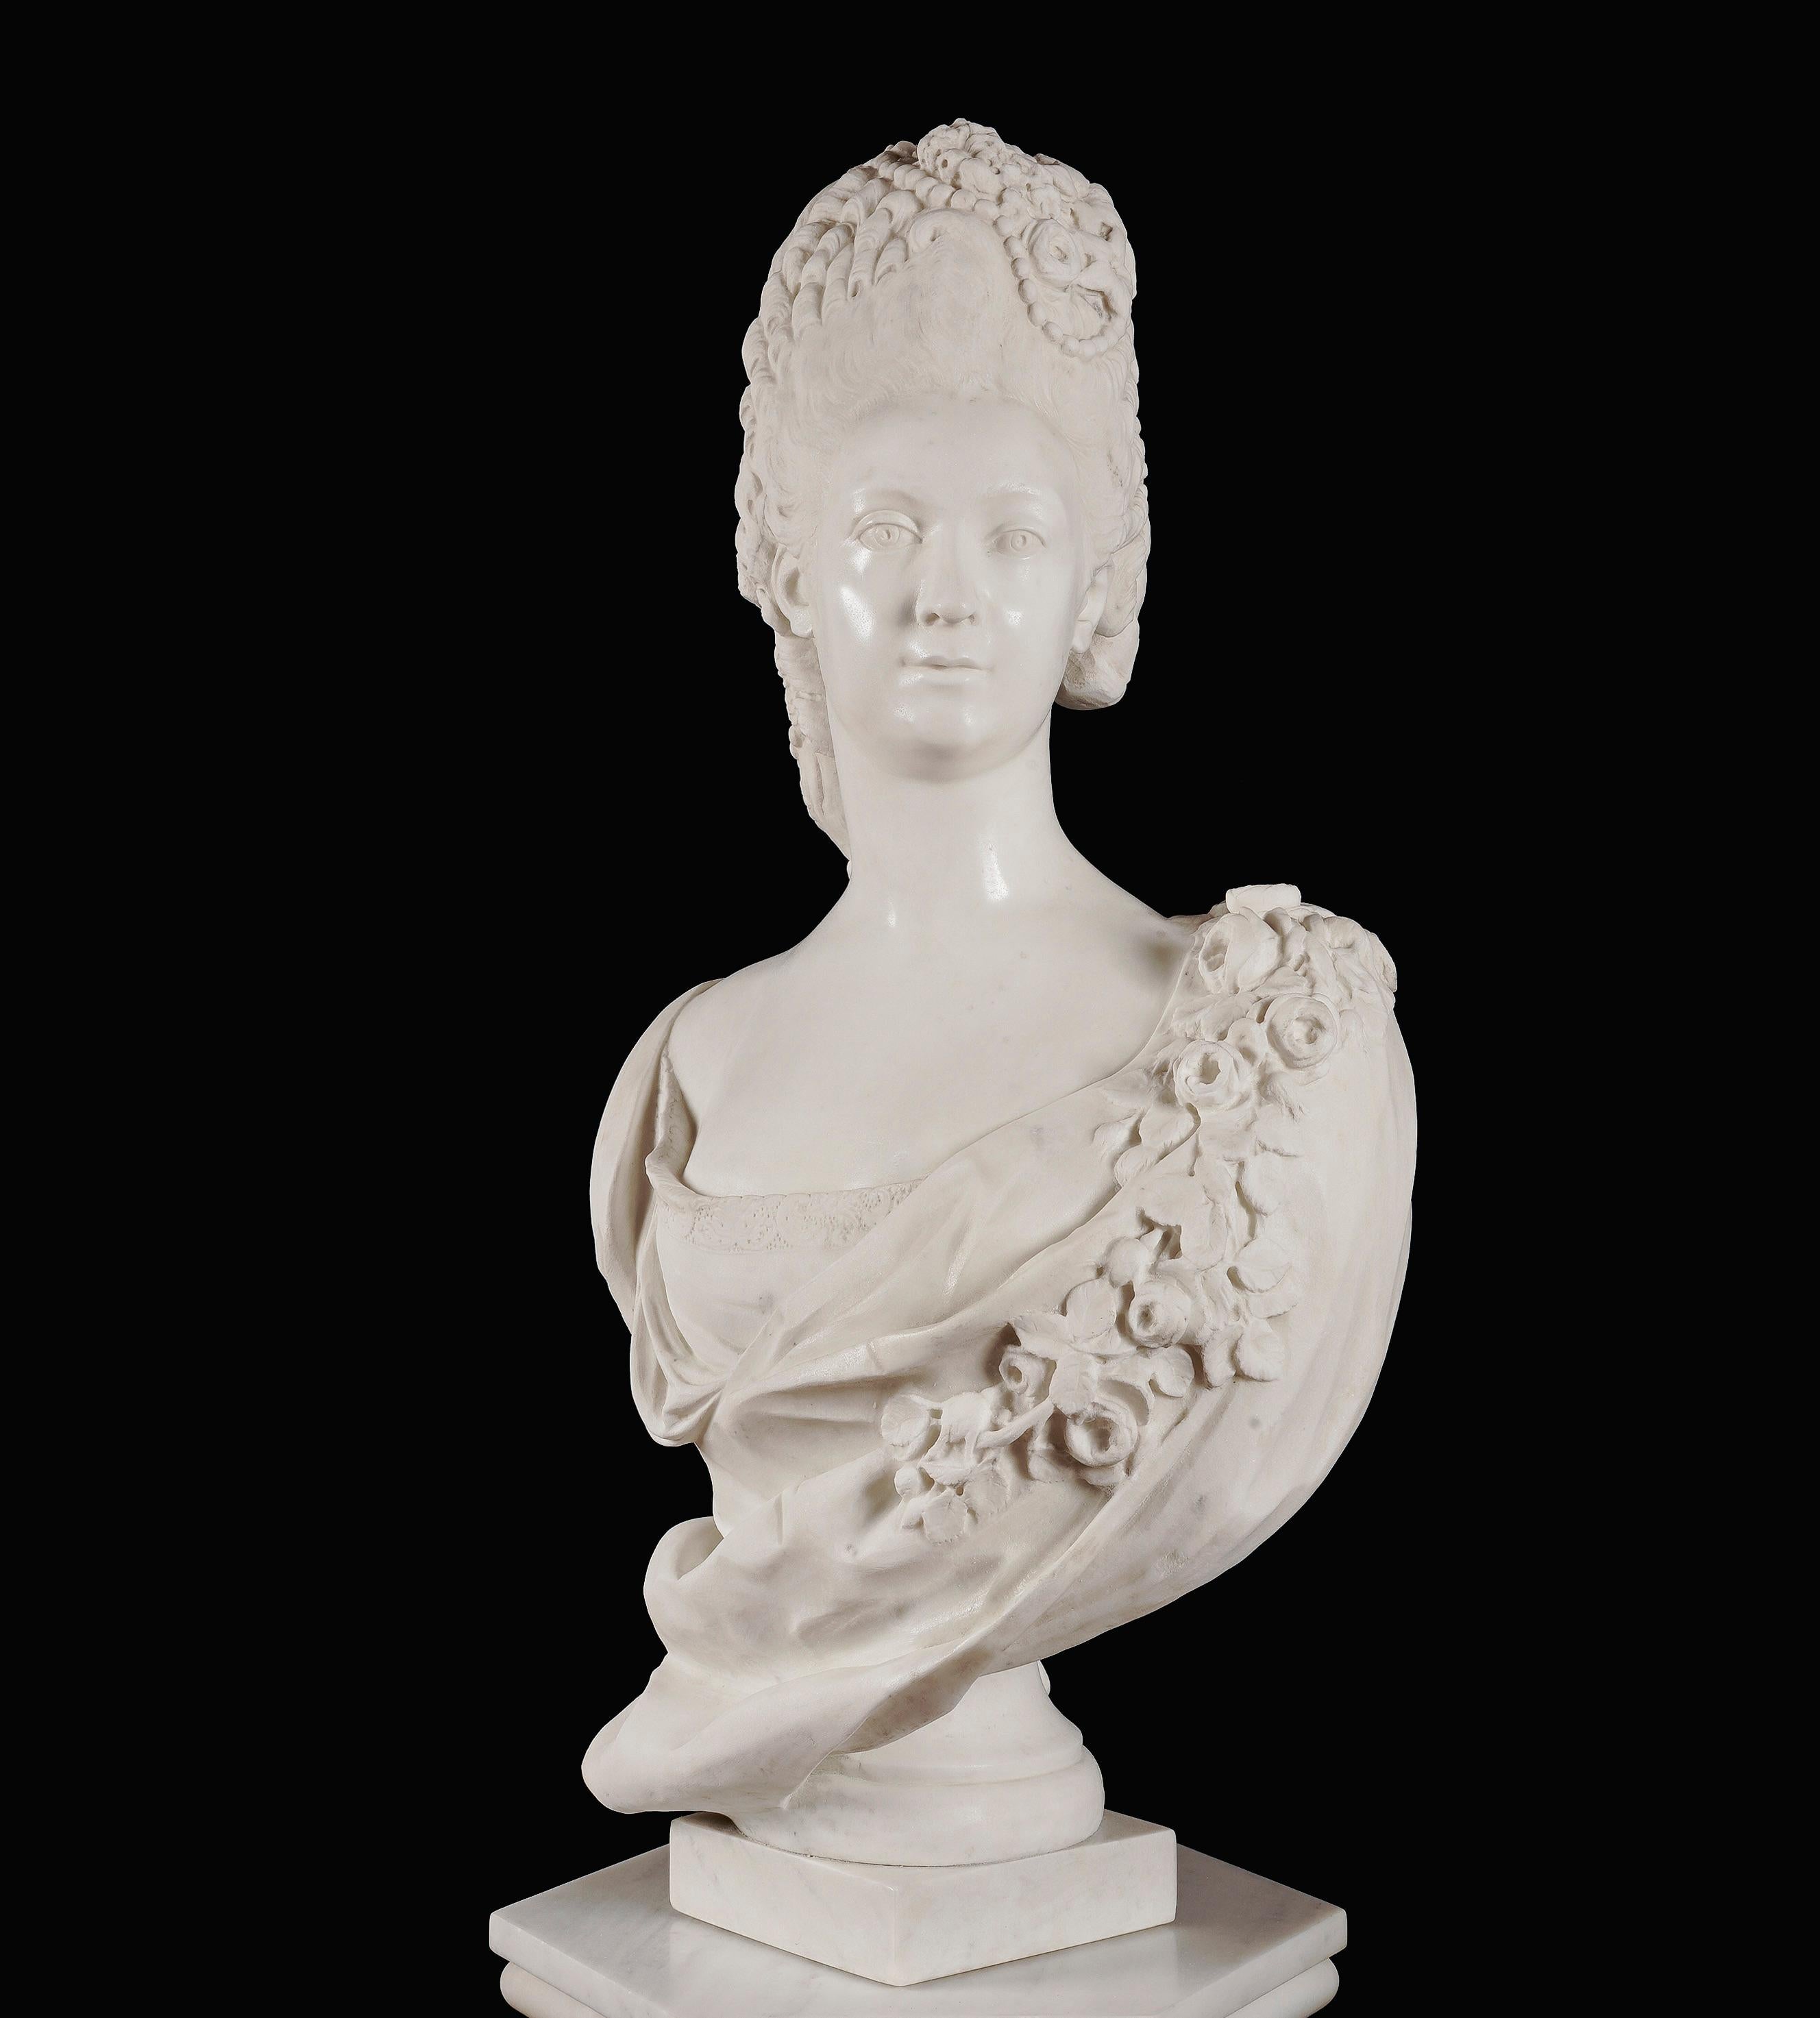 A pair of Royal Busts

Of Clotilde of France, Queen of Sardinia
And Marie Adélaïde of Savoy, Dauphine of France

Both noblewomen carved from marble and dressed in contemporary fashion, wearing luxurious flowing garments, their hair coiffed,